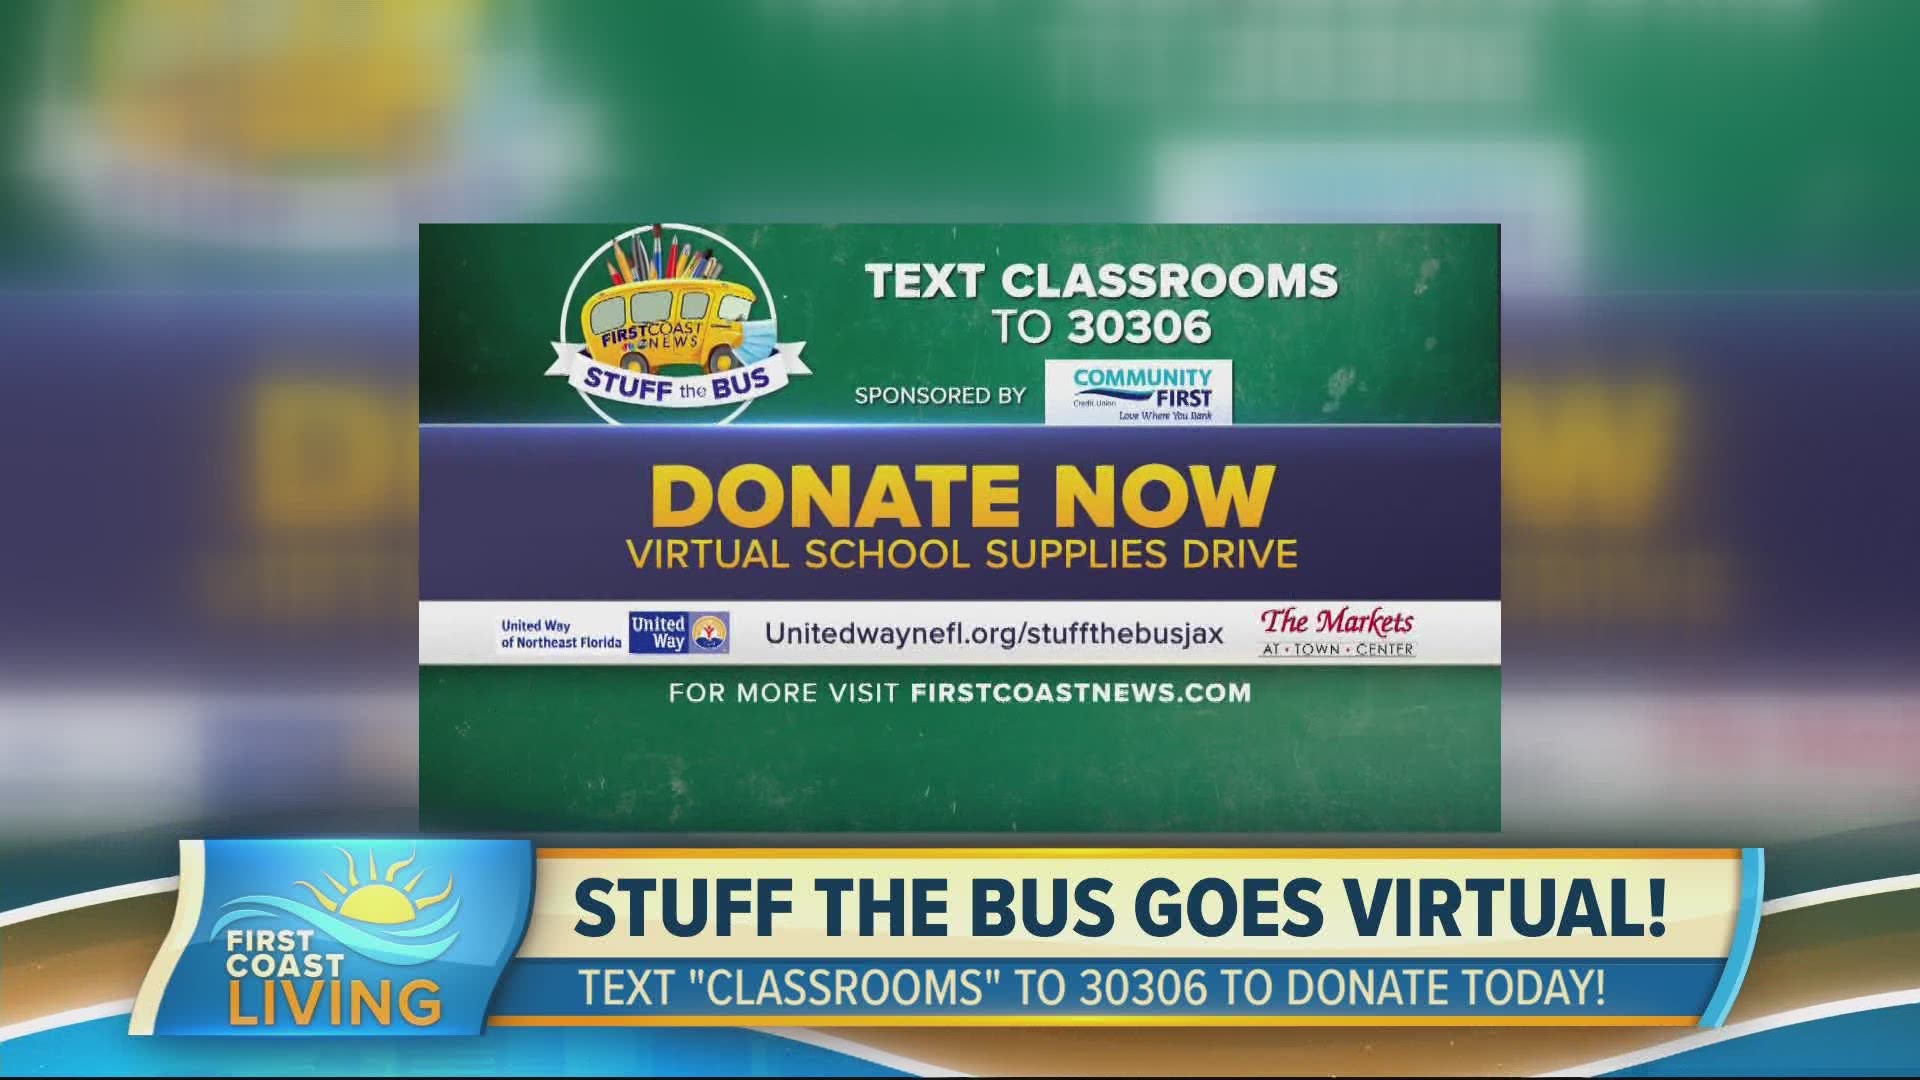 The supplies collected during Stuff the Bus will be distributed to more than 57,000 students in over 80 Duval County public schools